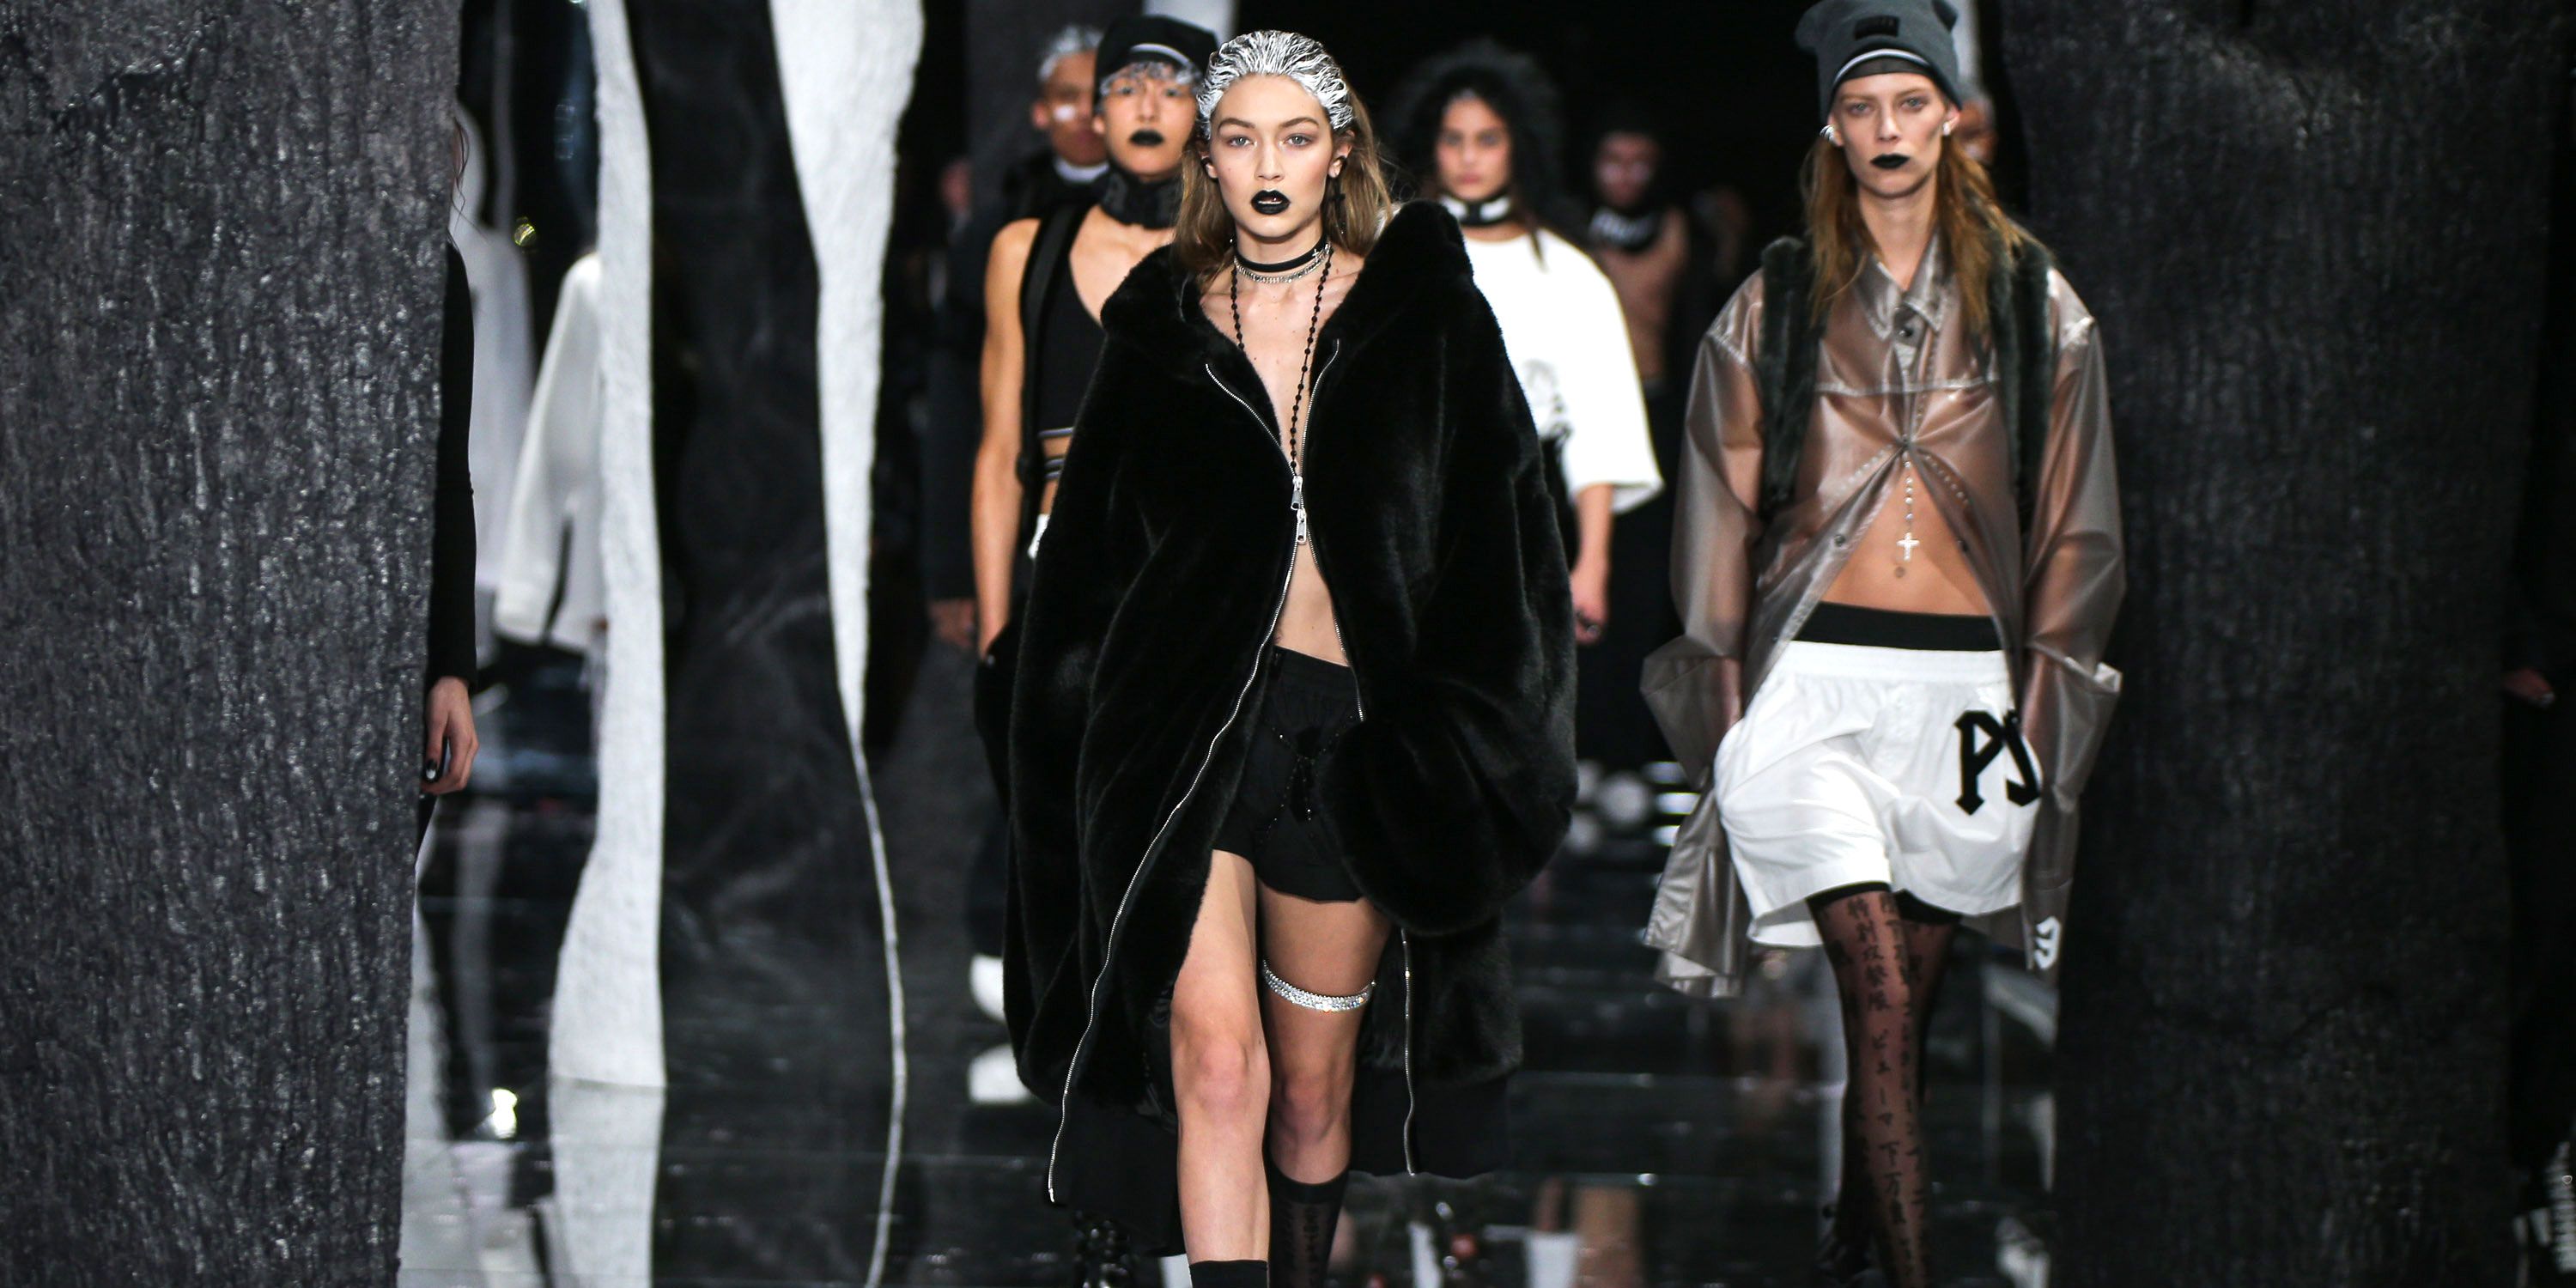 Destiny companion outer All the Looks From the Fenty x Puma by Rihanna Fall 2016 Ready-to-Wear Show